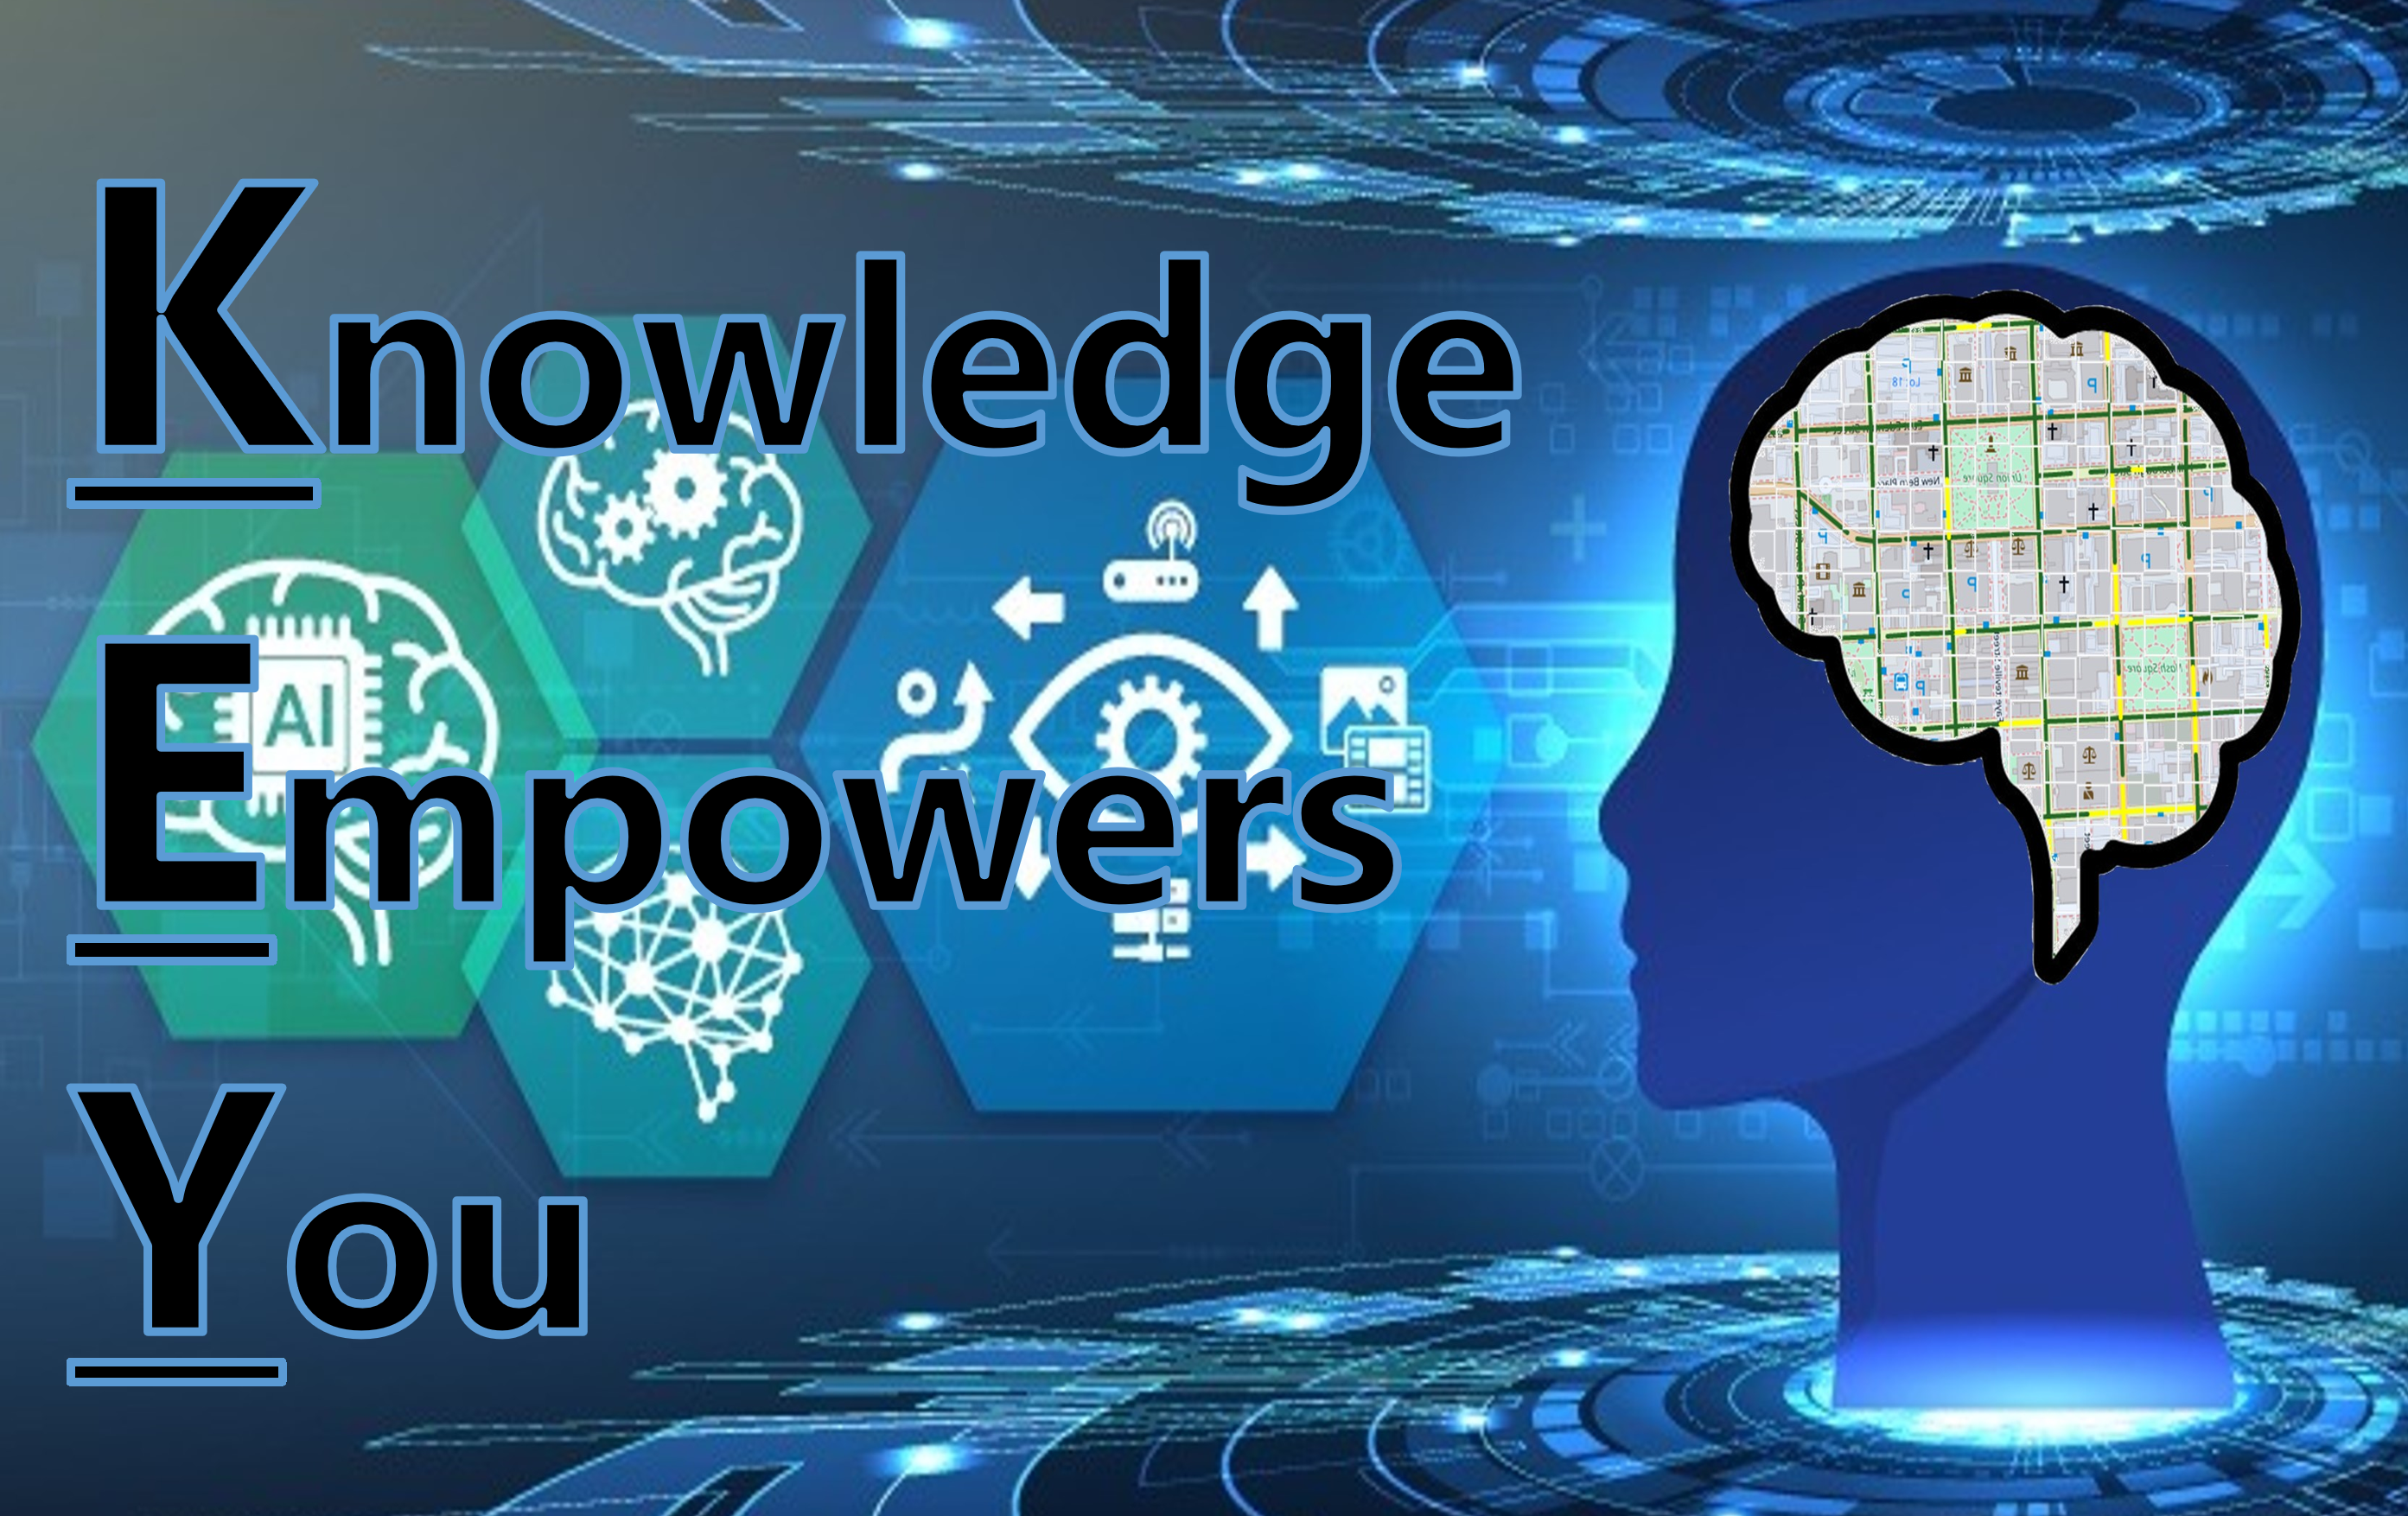 Road Triage - Knowledge Empowers You